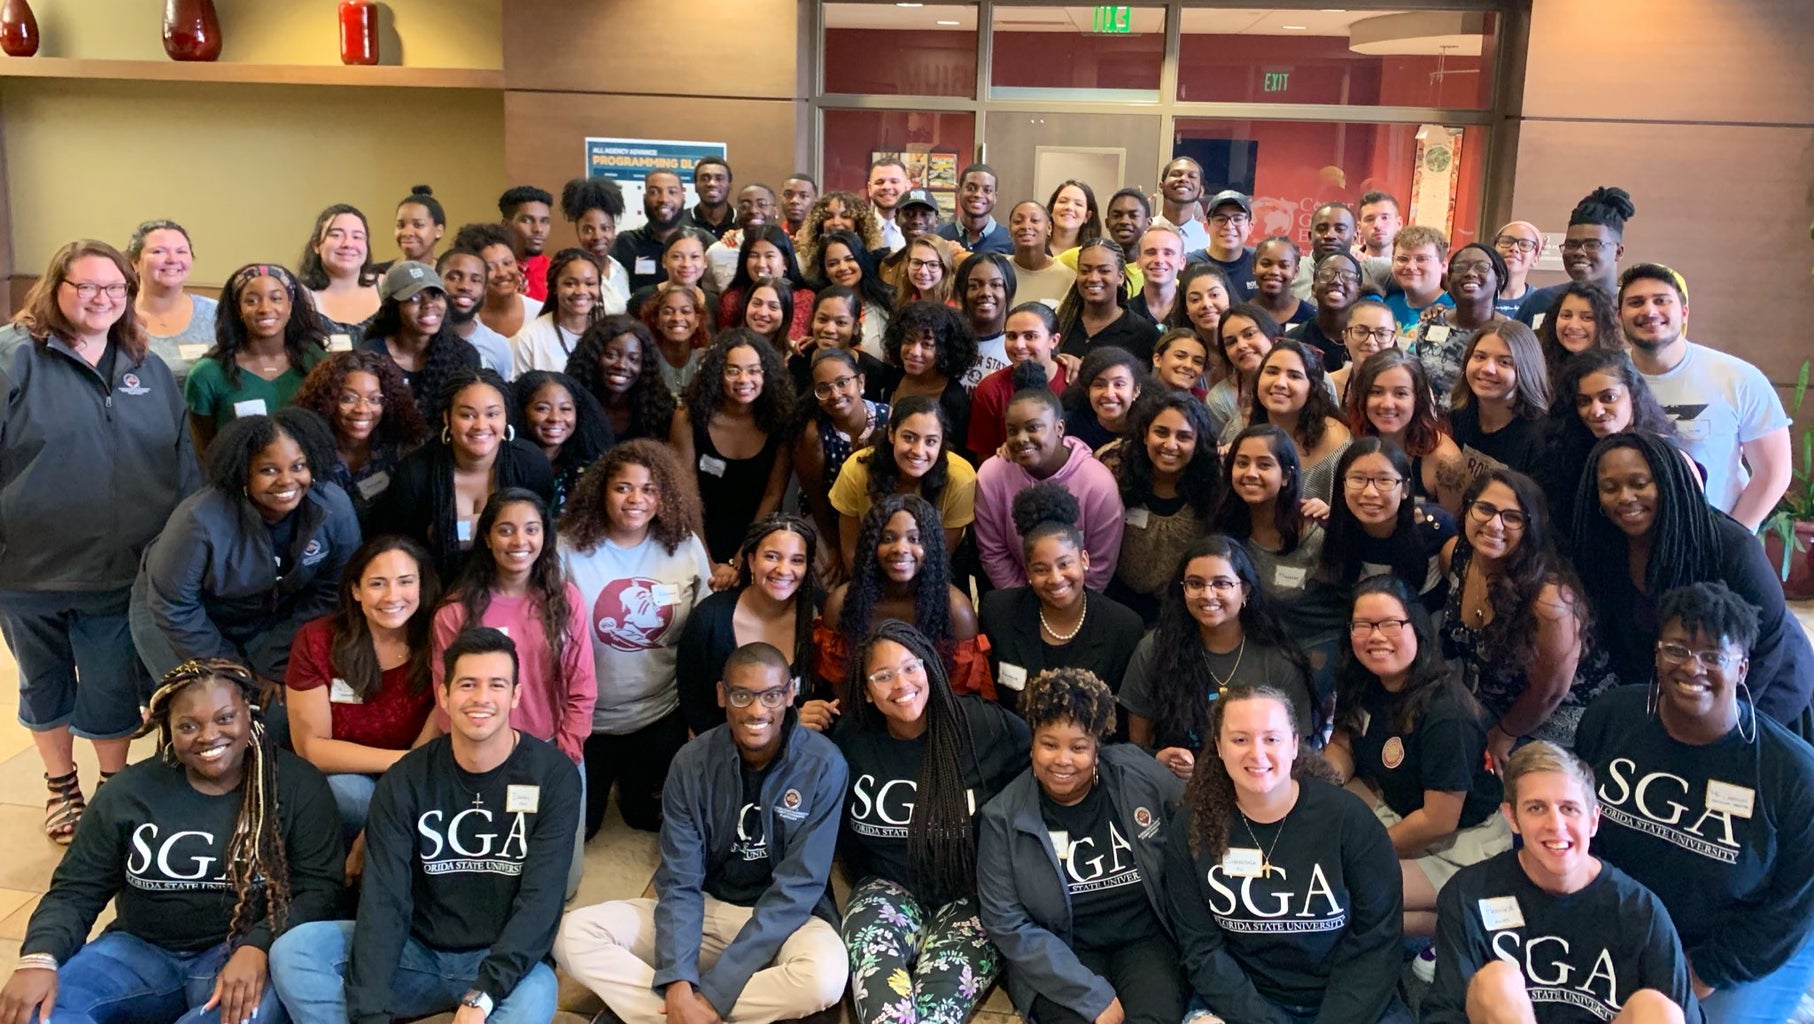 There are people wearing SGA shirts in the front. This picture was taken at SGA All-Agency Meeting